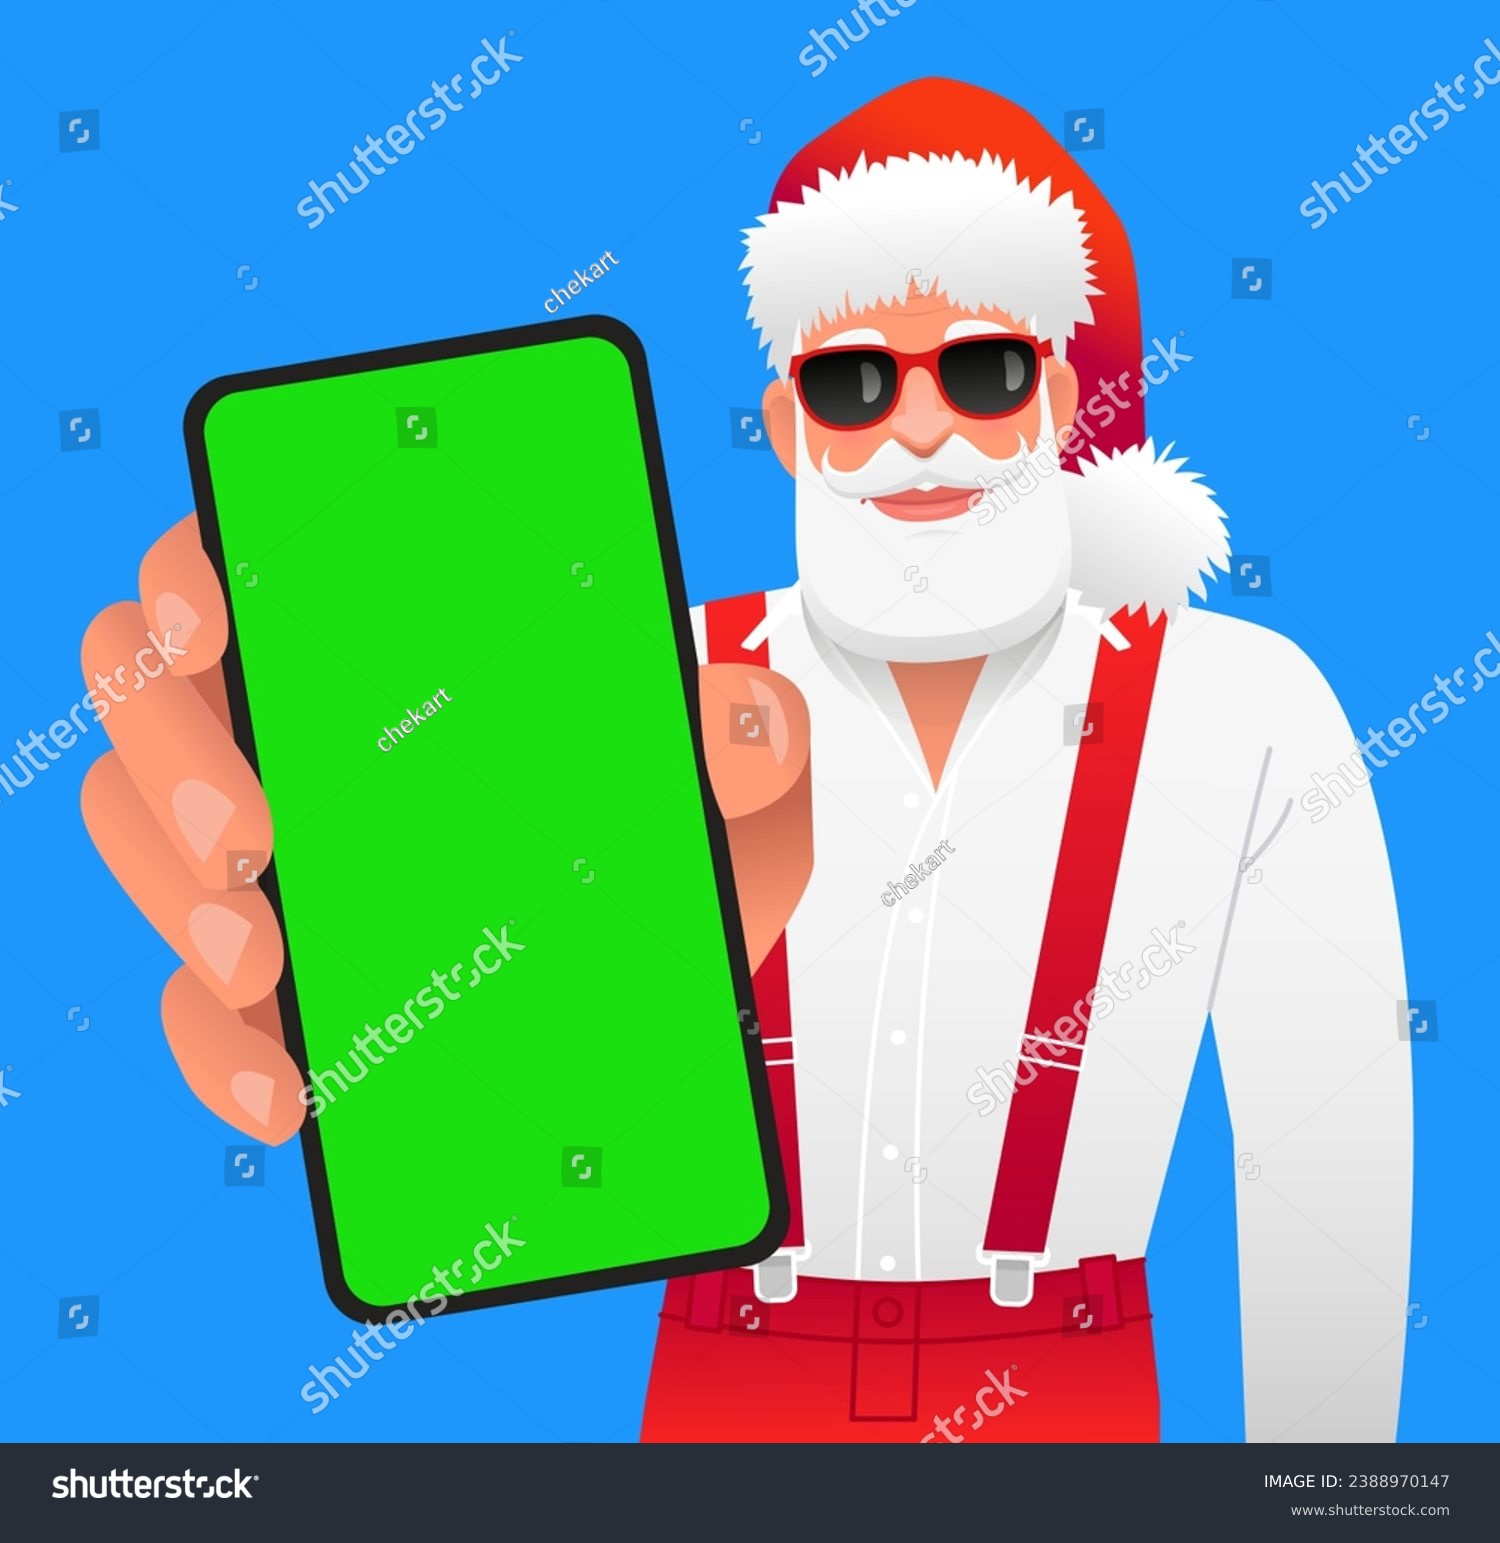 SVG of Stylish bearded Santa Claus in sunglasses stands with a smartphone in his hand. Close-up of the green screen of the phone. Place to advertise a mobile app. Vector illustration. svg